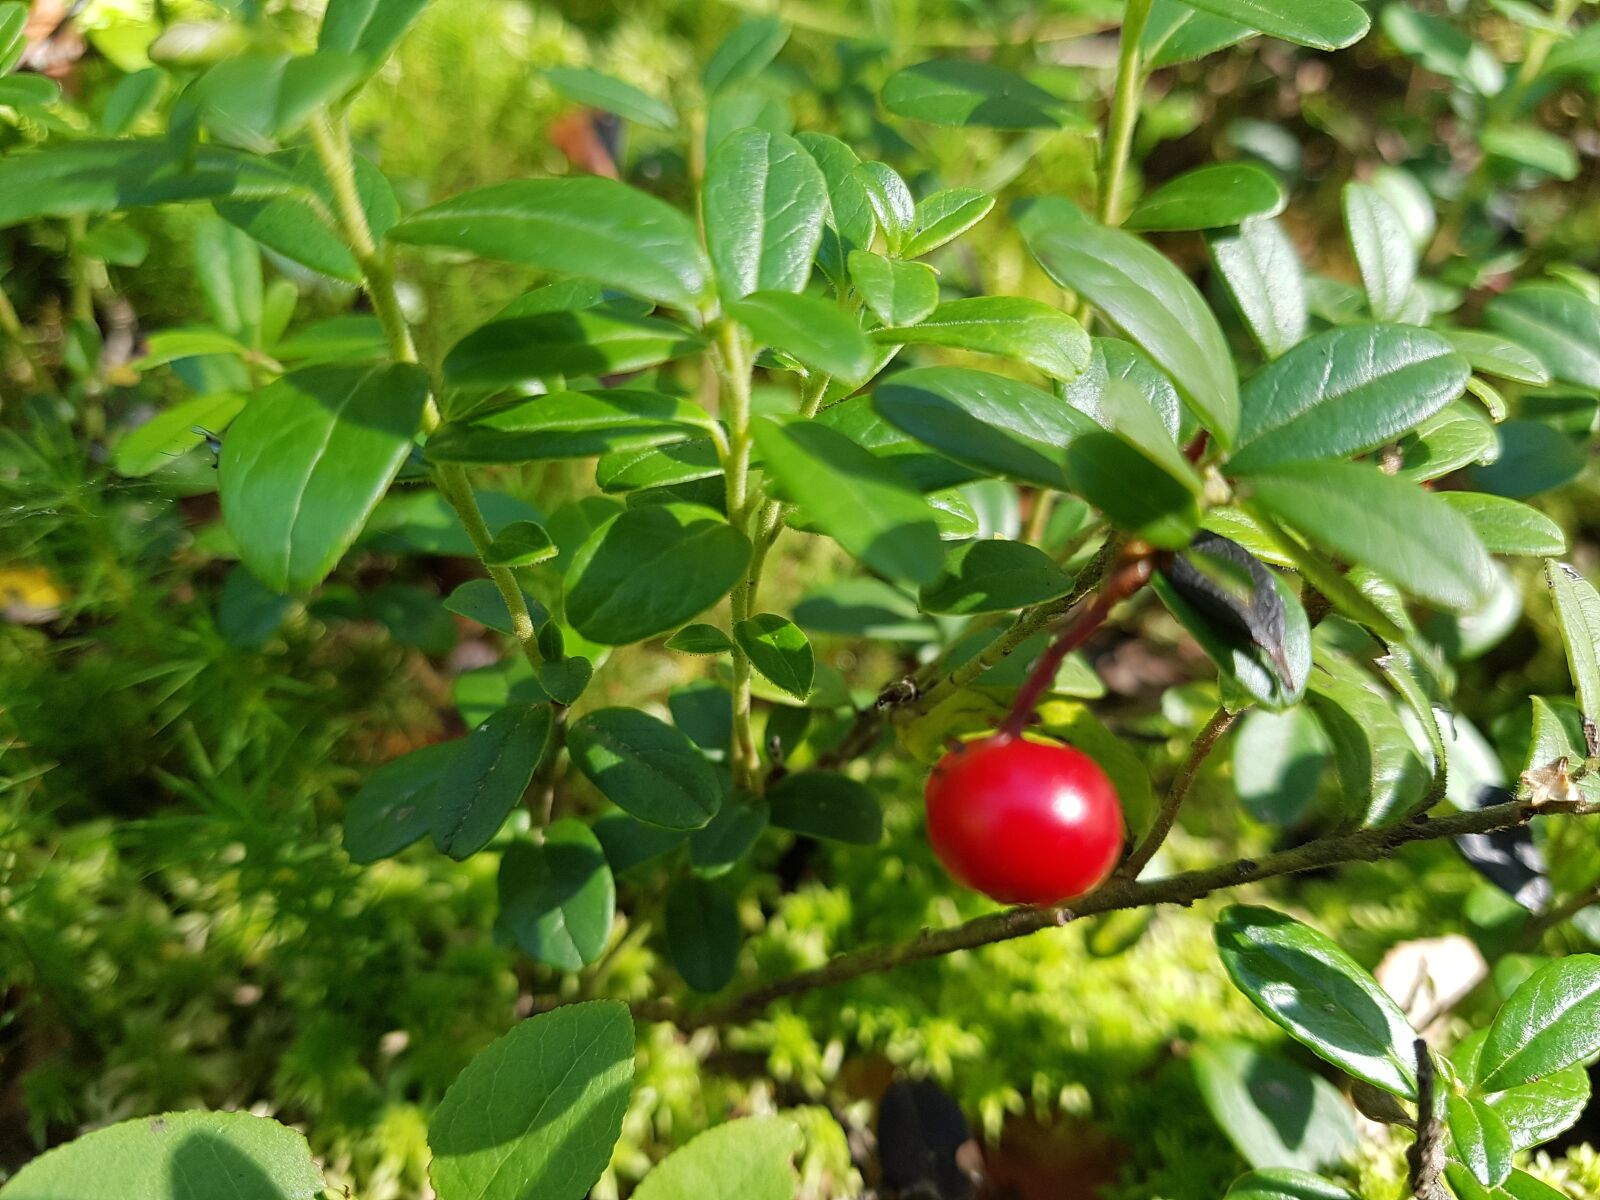 Samsung Galaxy S7 sample photo. Cranberries, velikodvor'ye, forest photography